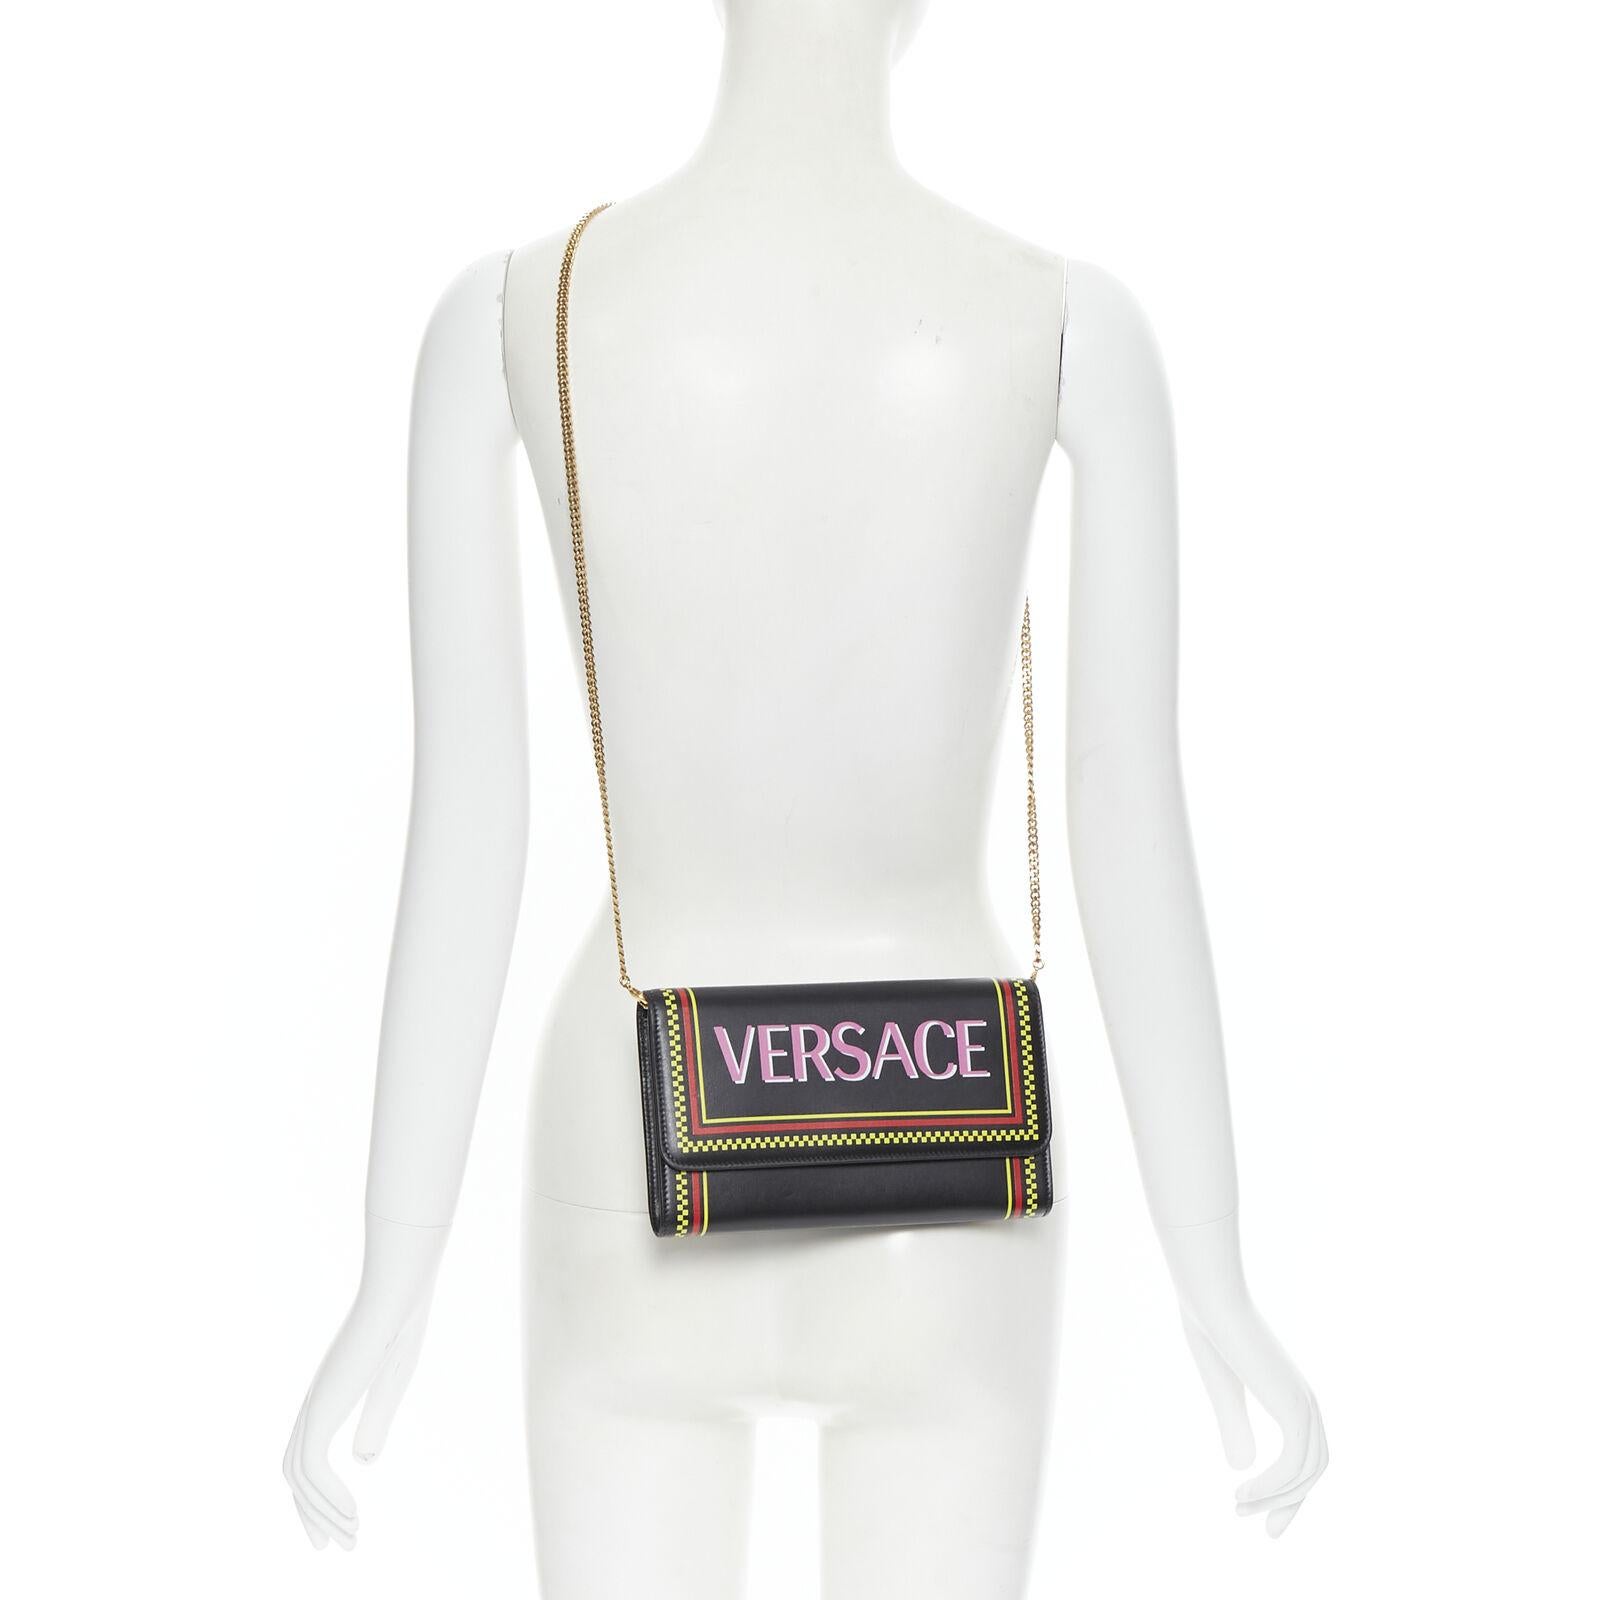 new VERSACE 90s pink logo black leather WOC flap clutch crossbody bag 
Reference: TGAS/B00506 
Brand: Versace 
Designer: Donatella Versace 
Model: 90's logo wallet on chain clutch 
Material: Leather 
Color: Black 
Pattern: Solid 
Closure: Button